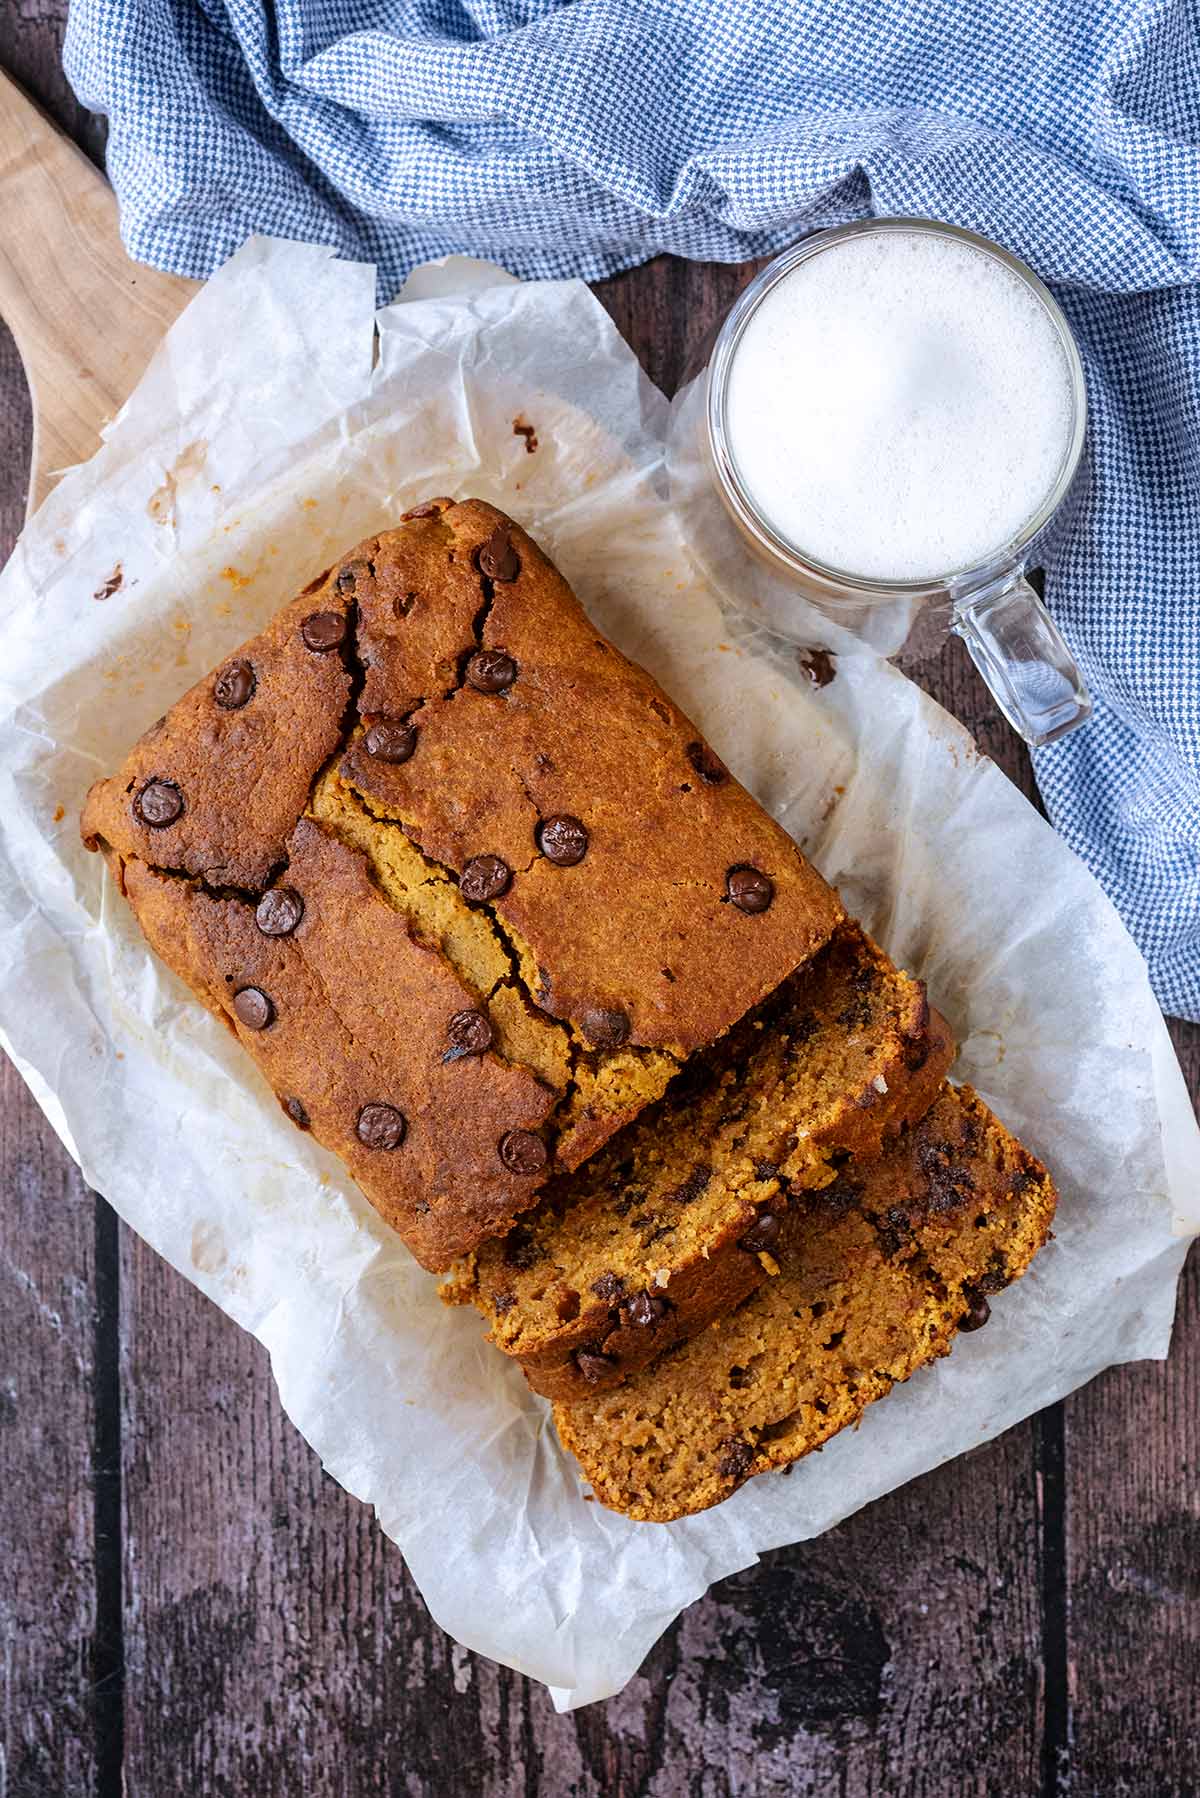 Chocolate chip loaf cake on a wooden surface with two slices cur off.